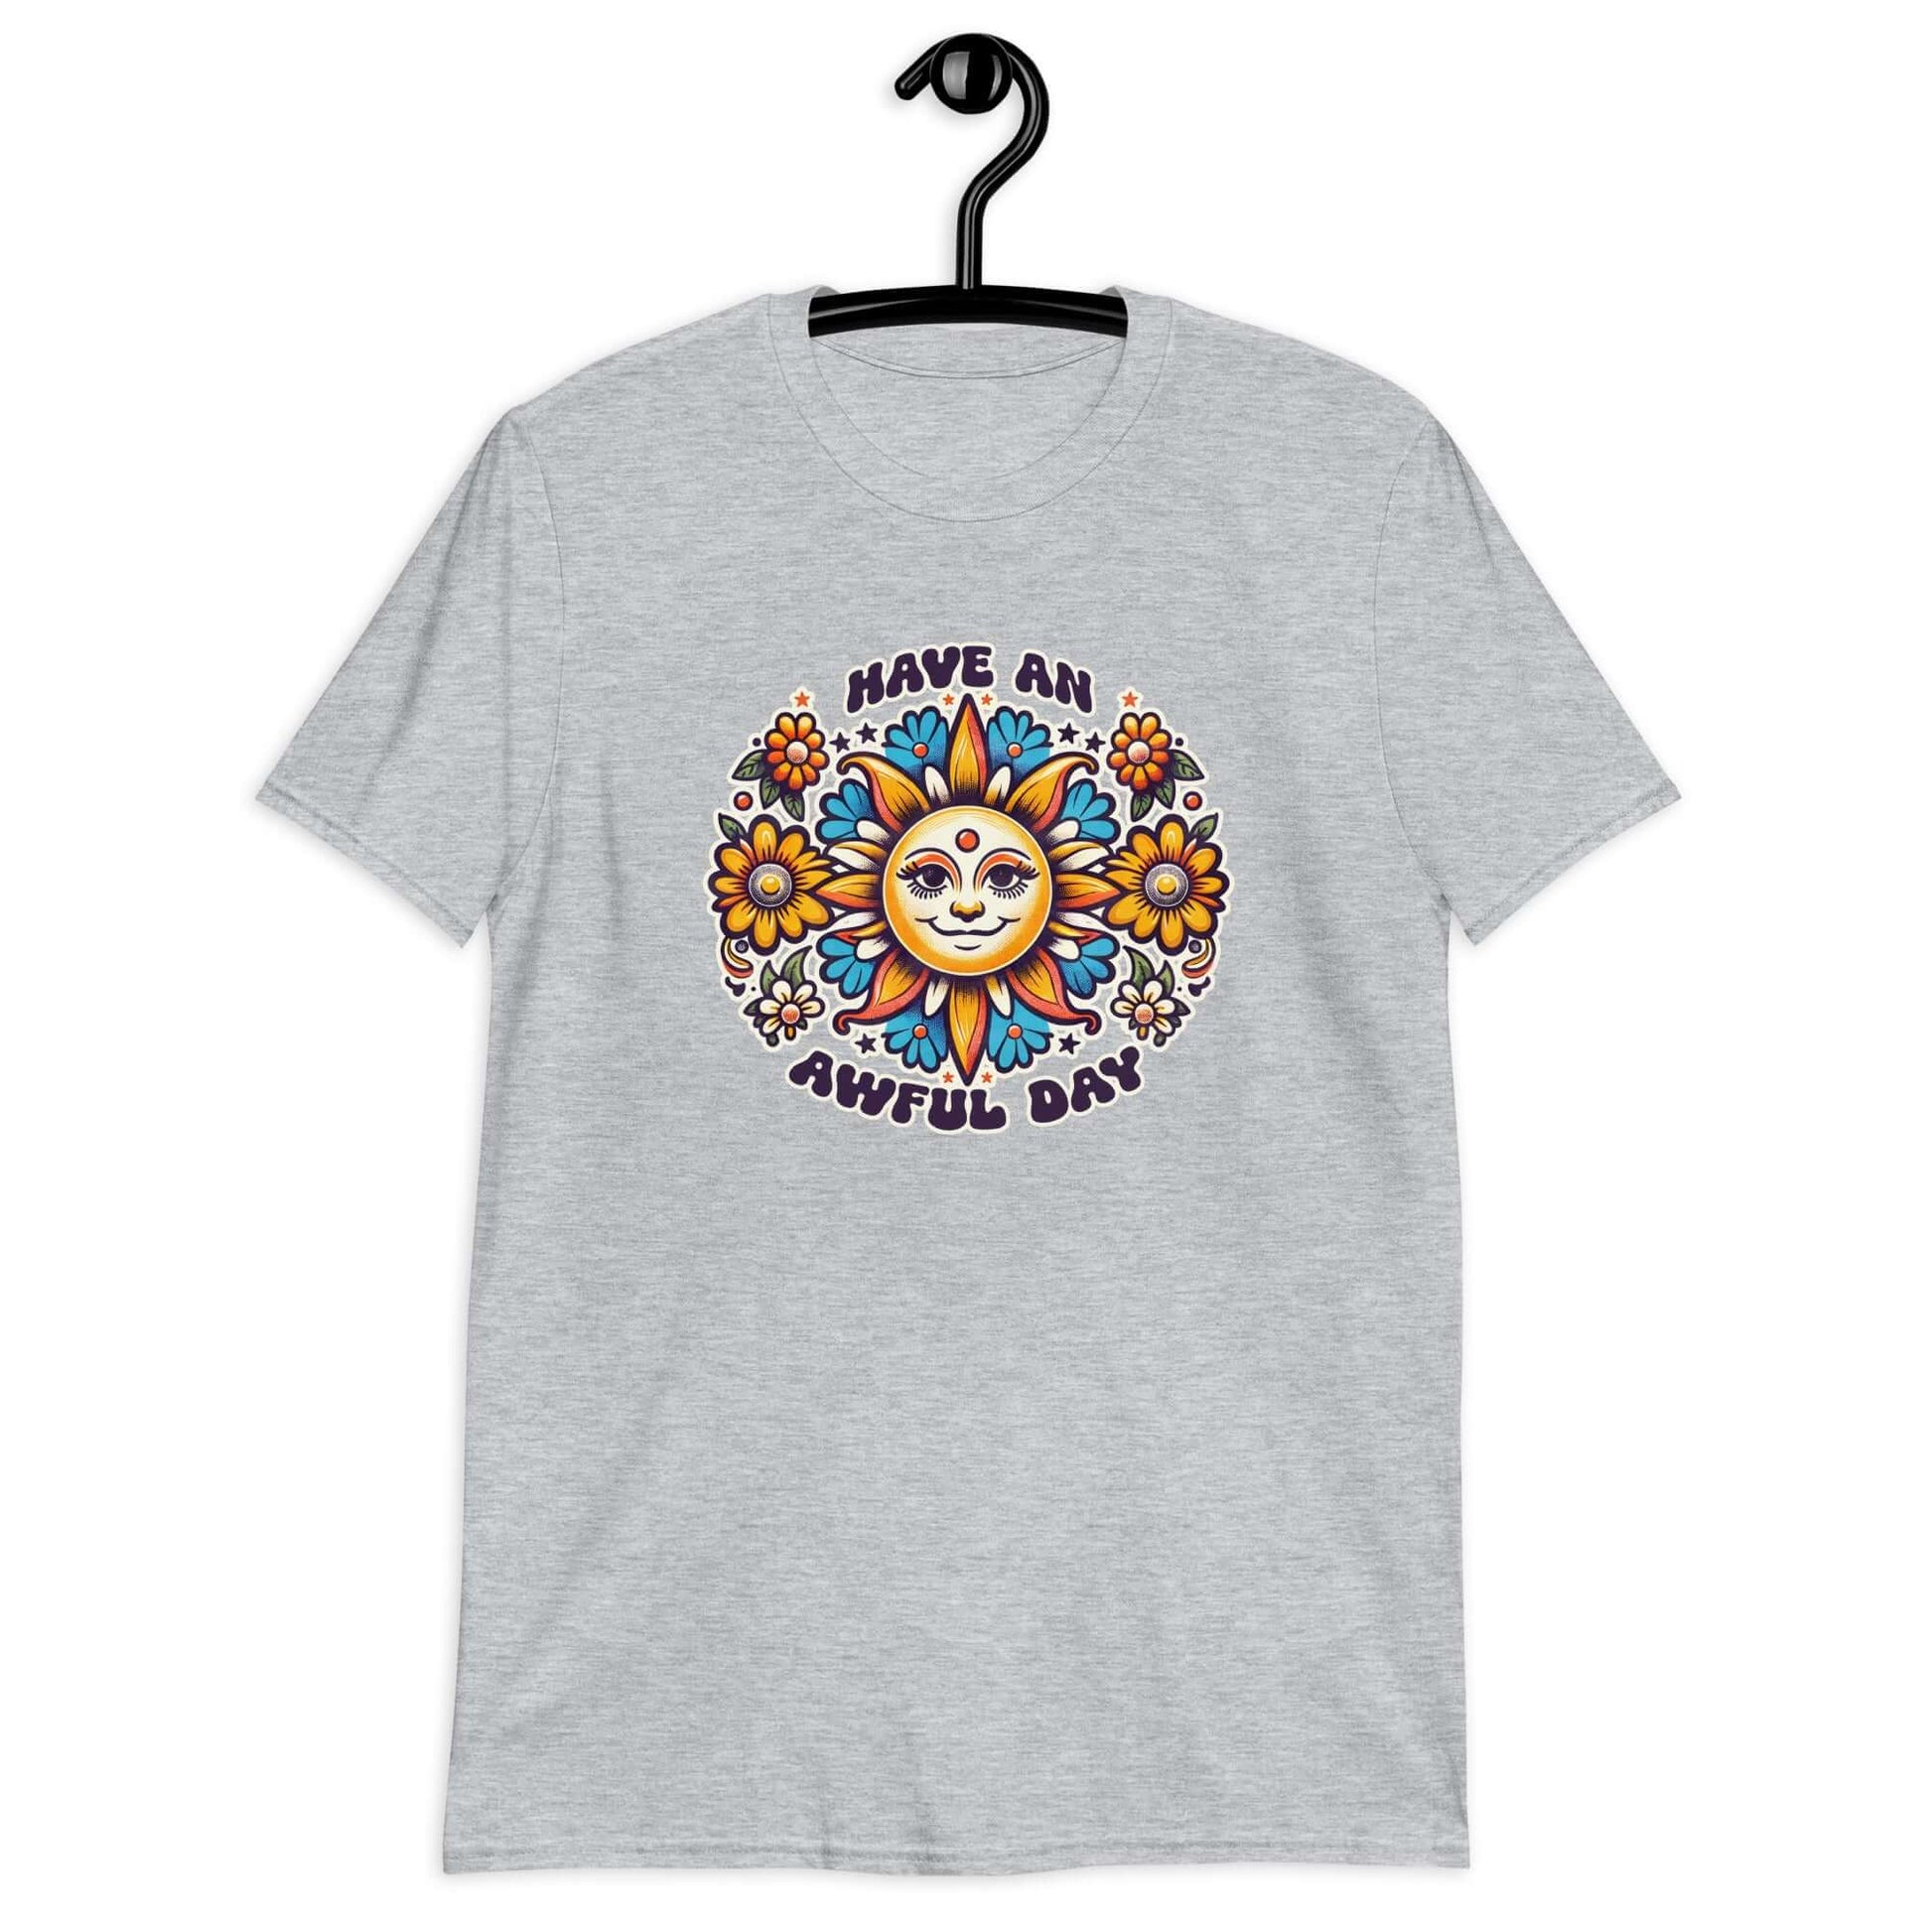 Light sport grey t-shirt with a sun graphic and the phrase Have an awful day printed on the front.